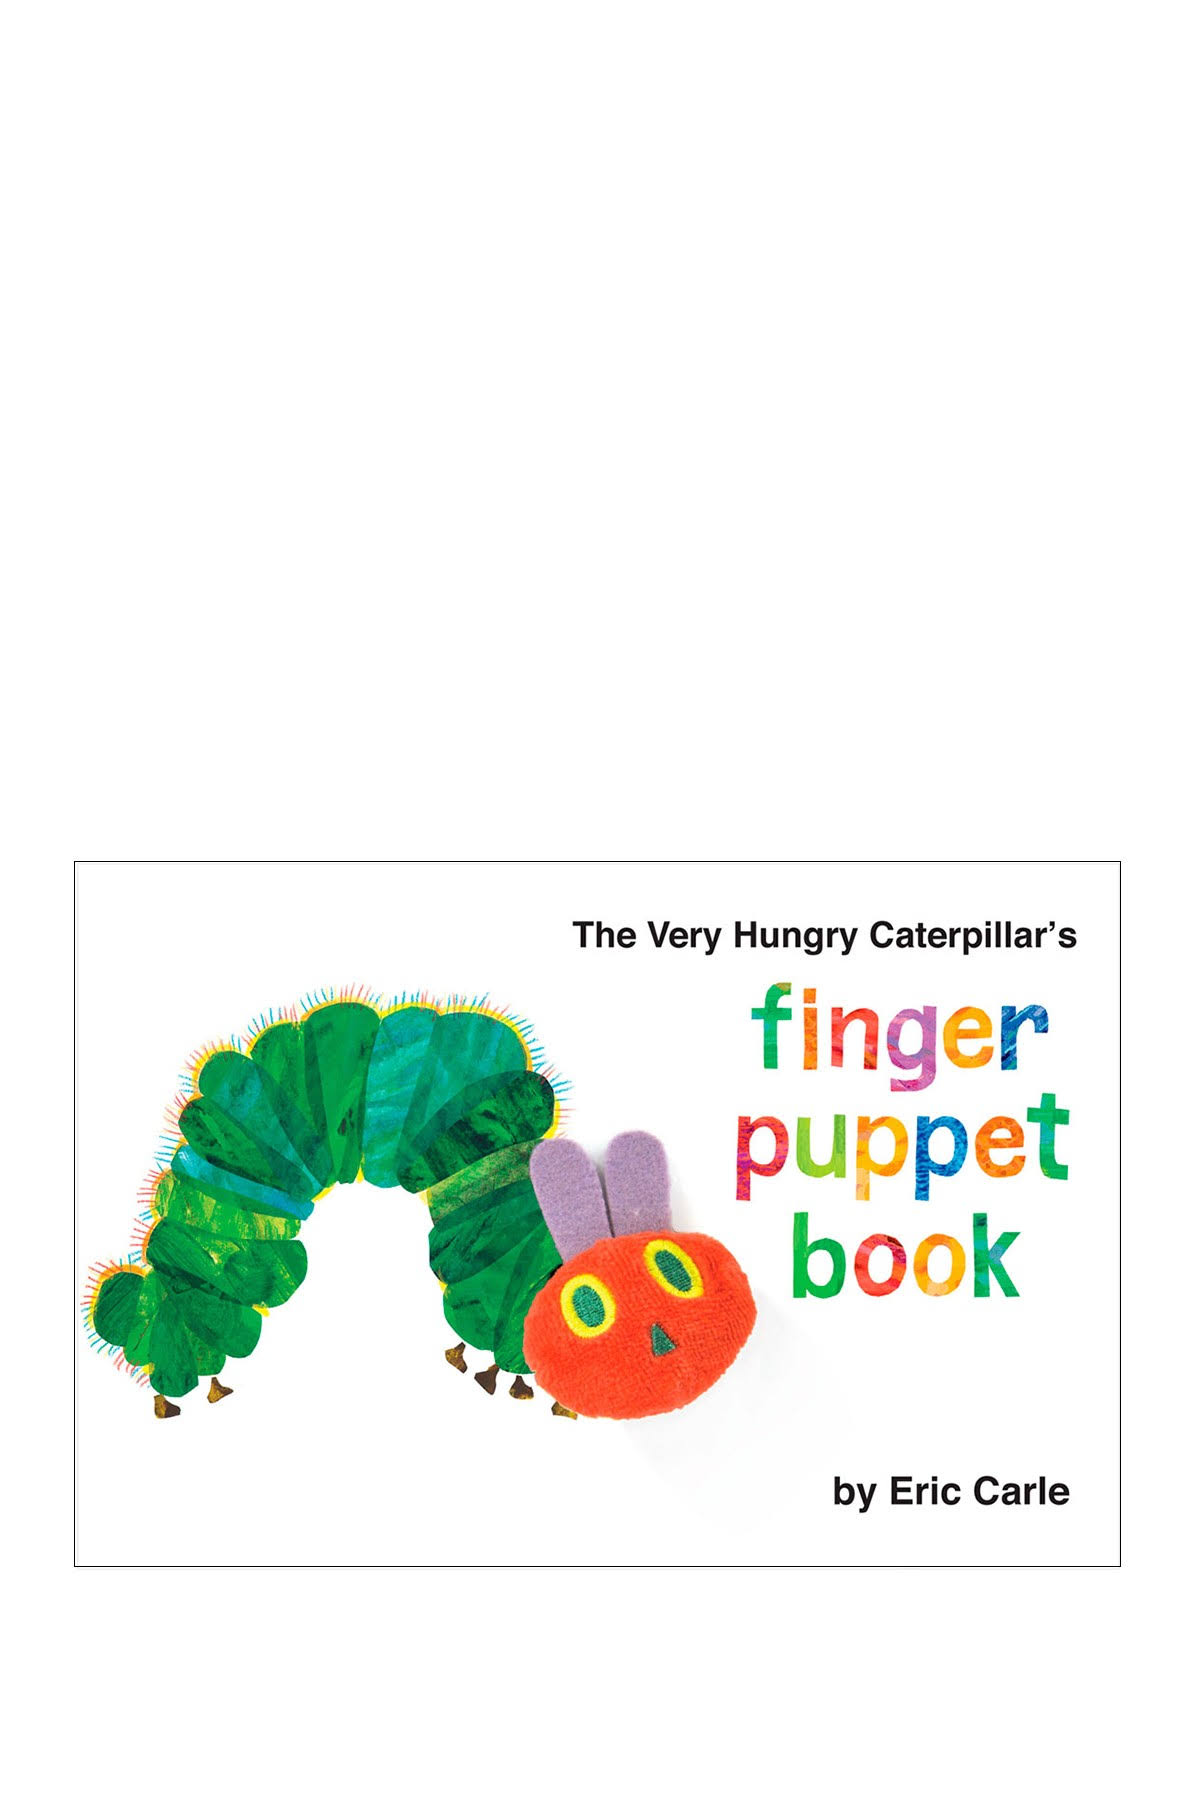 The Very Hungry Caterpillar's Finger Puppet Book [Book]